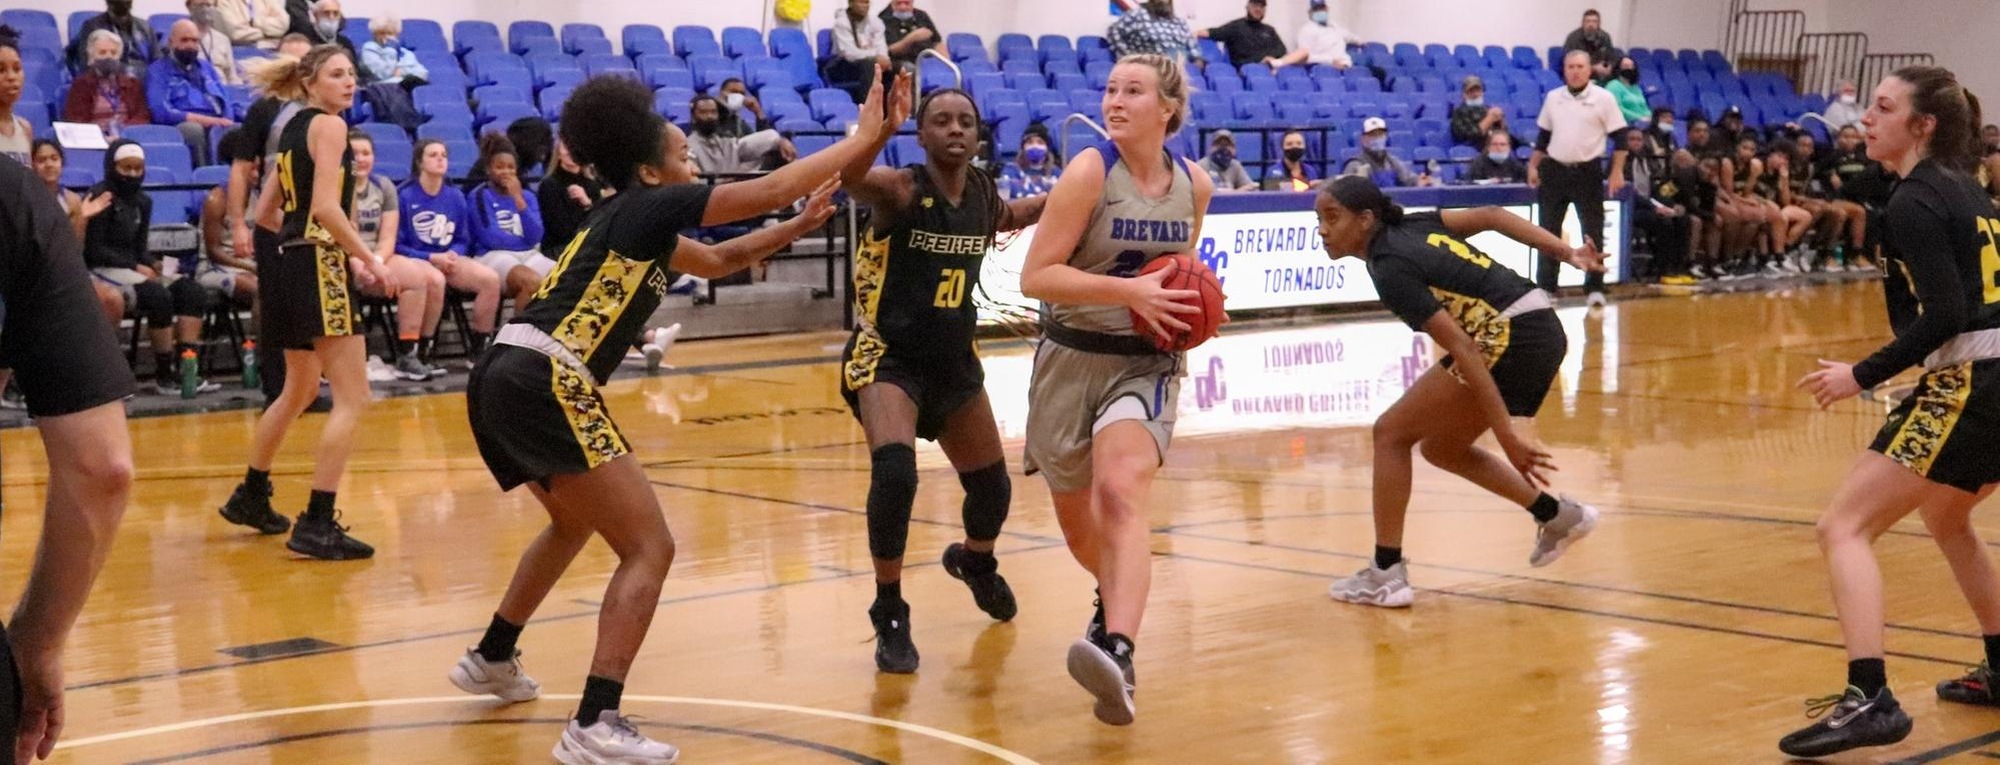 Miller and Parkins Tally Double-Doubles as Tornados Take 67-49 Win in Season-Opener